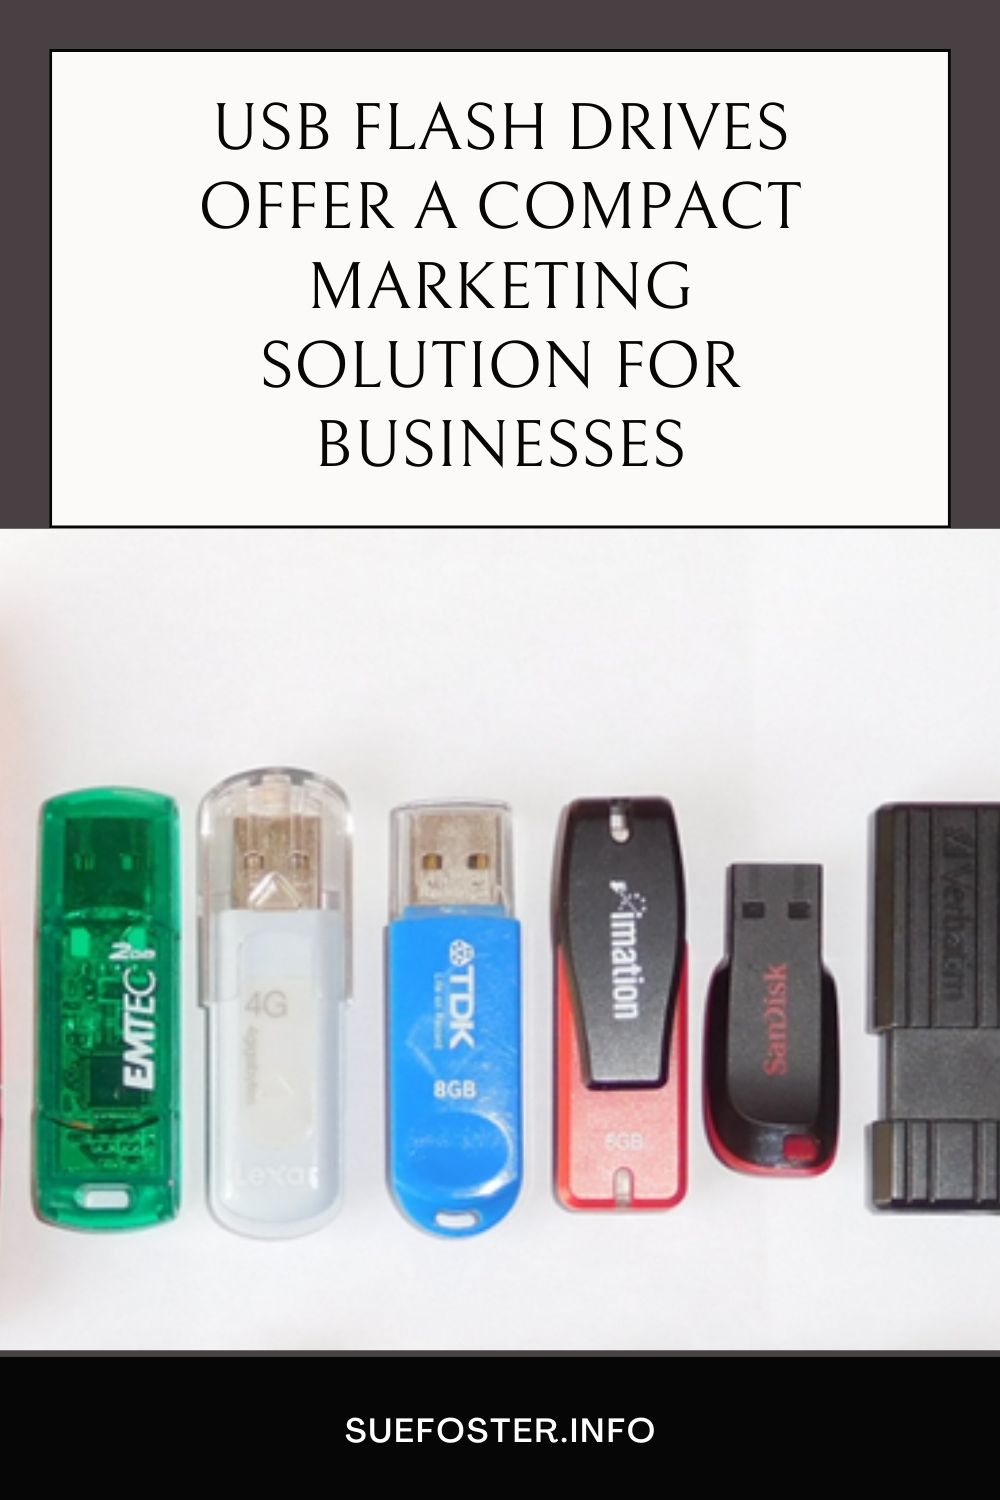 Learn how USB drives offer a unique and valuable approach to promote your business. Stand out with tangible and customisable options making offline marketing easy.